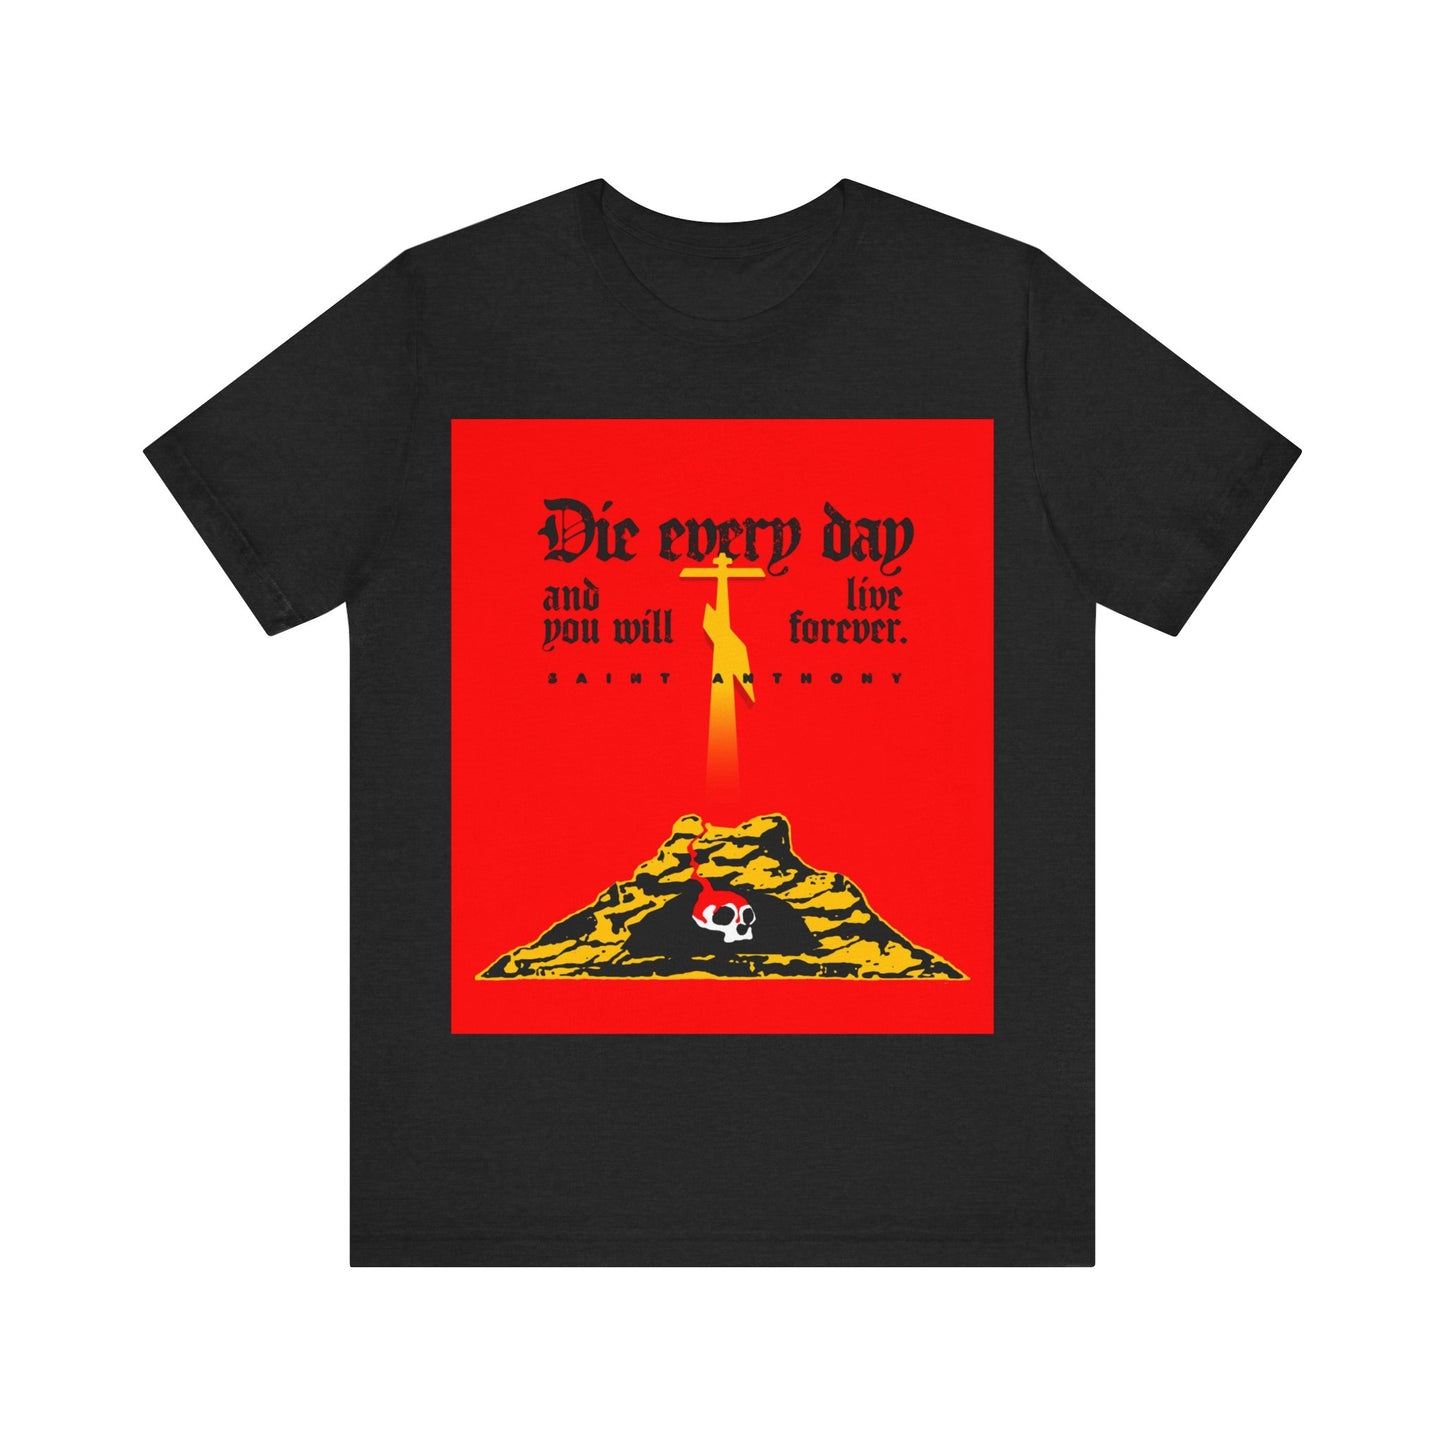 Die Every Day (St Anthony) No. 1 | Orthodox Christian T-Shirt